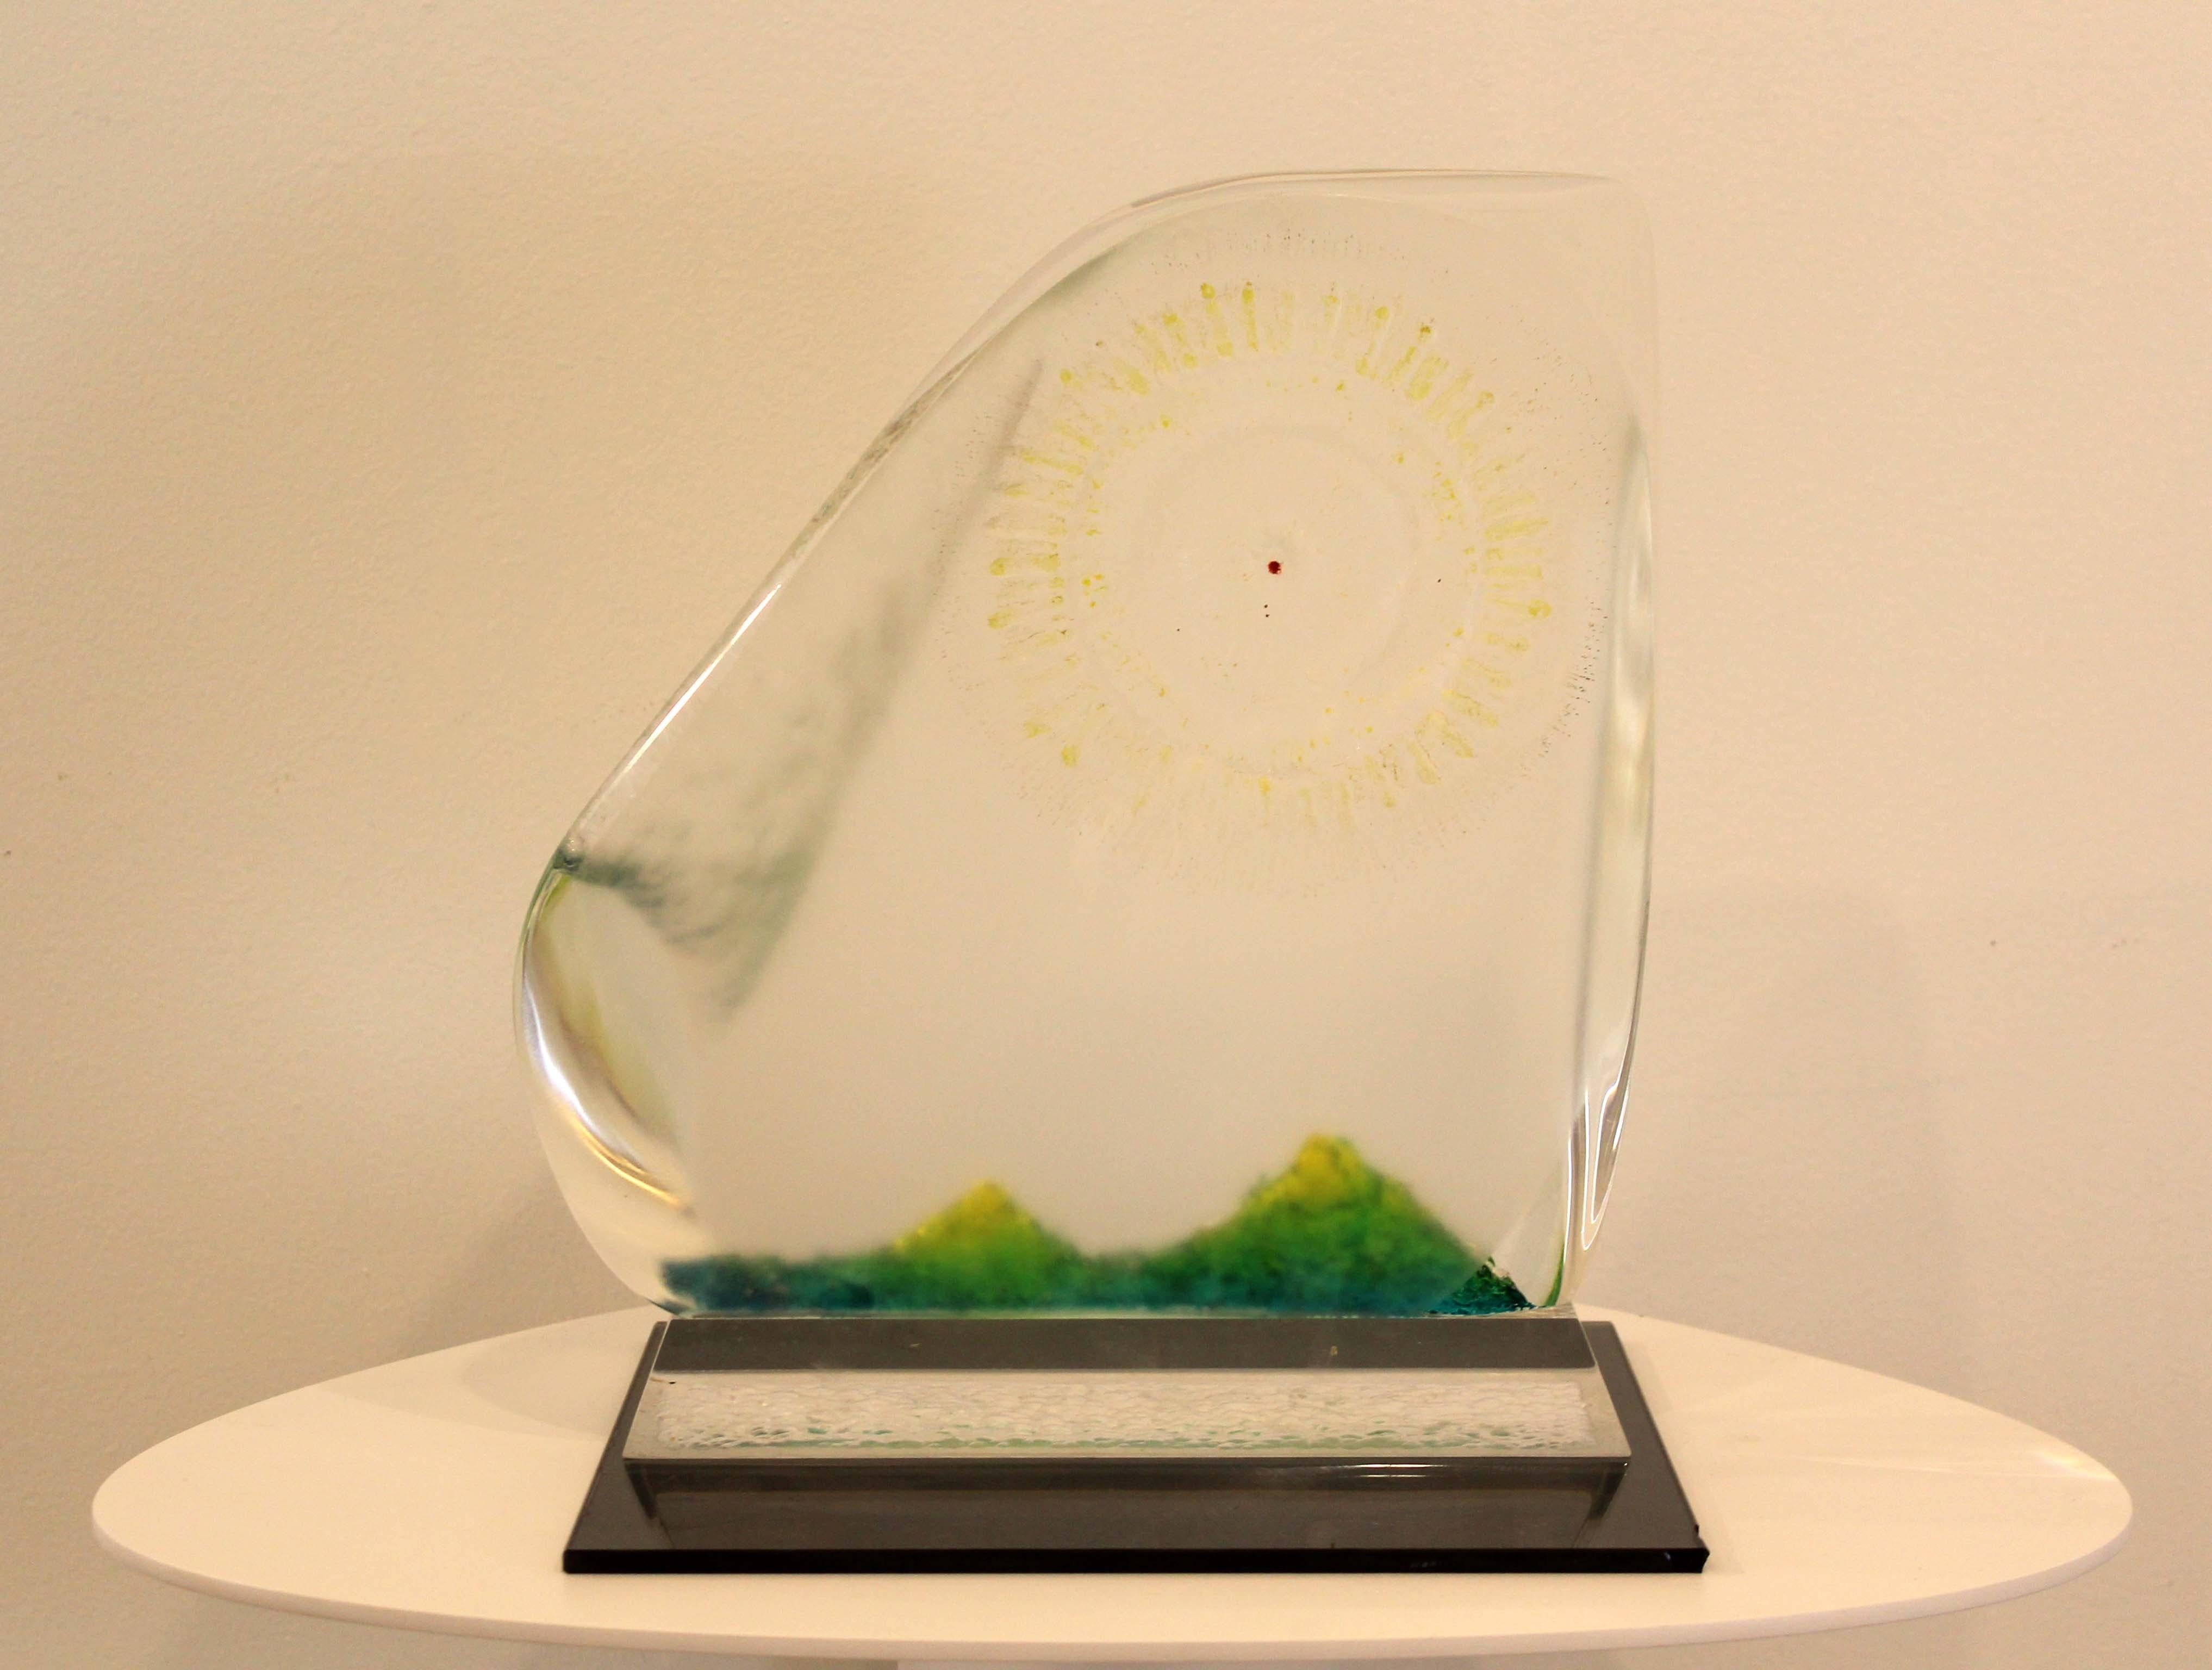 A fantastic acrylic sculpture with inlaid green and sunbeam designs by Detroit sculptor James Nani. A lovely addition to a modern décor. Circa 1980s. Dimensions: 12.75h x 9d x 11w. In excellent vintage condition. 

James Nani (1926-2016) was a